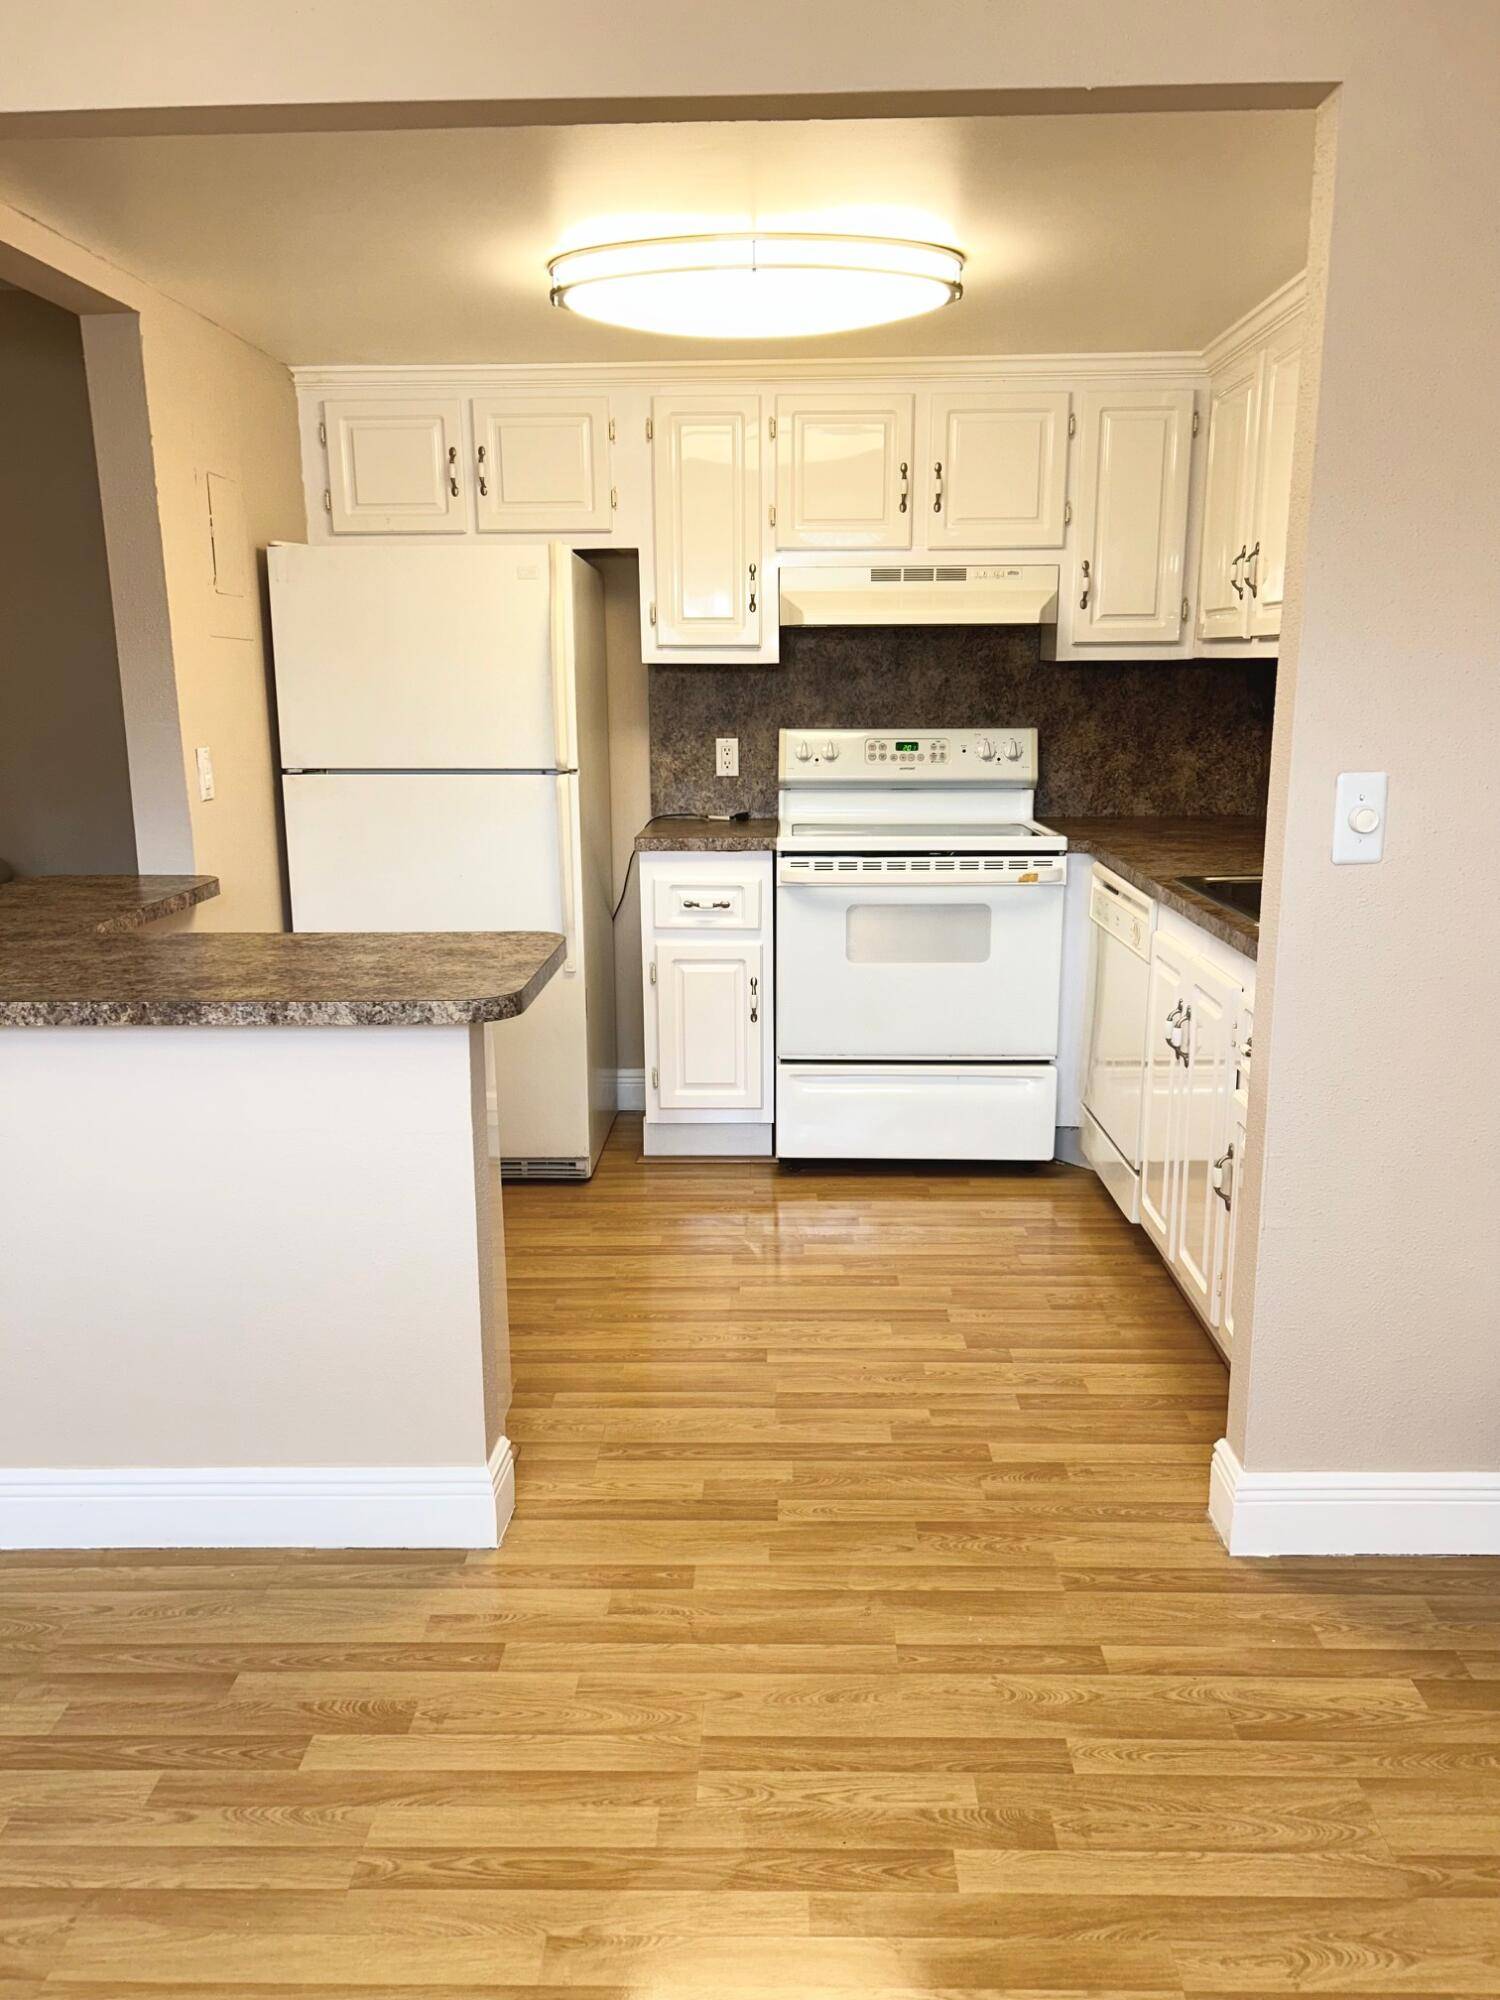 One bedroom, 1 1 2 bath with walk in shower and updated kitchen and baths !